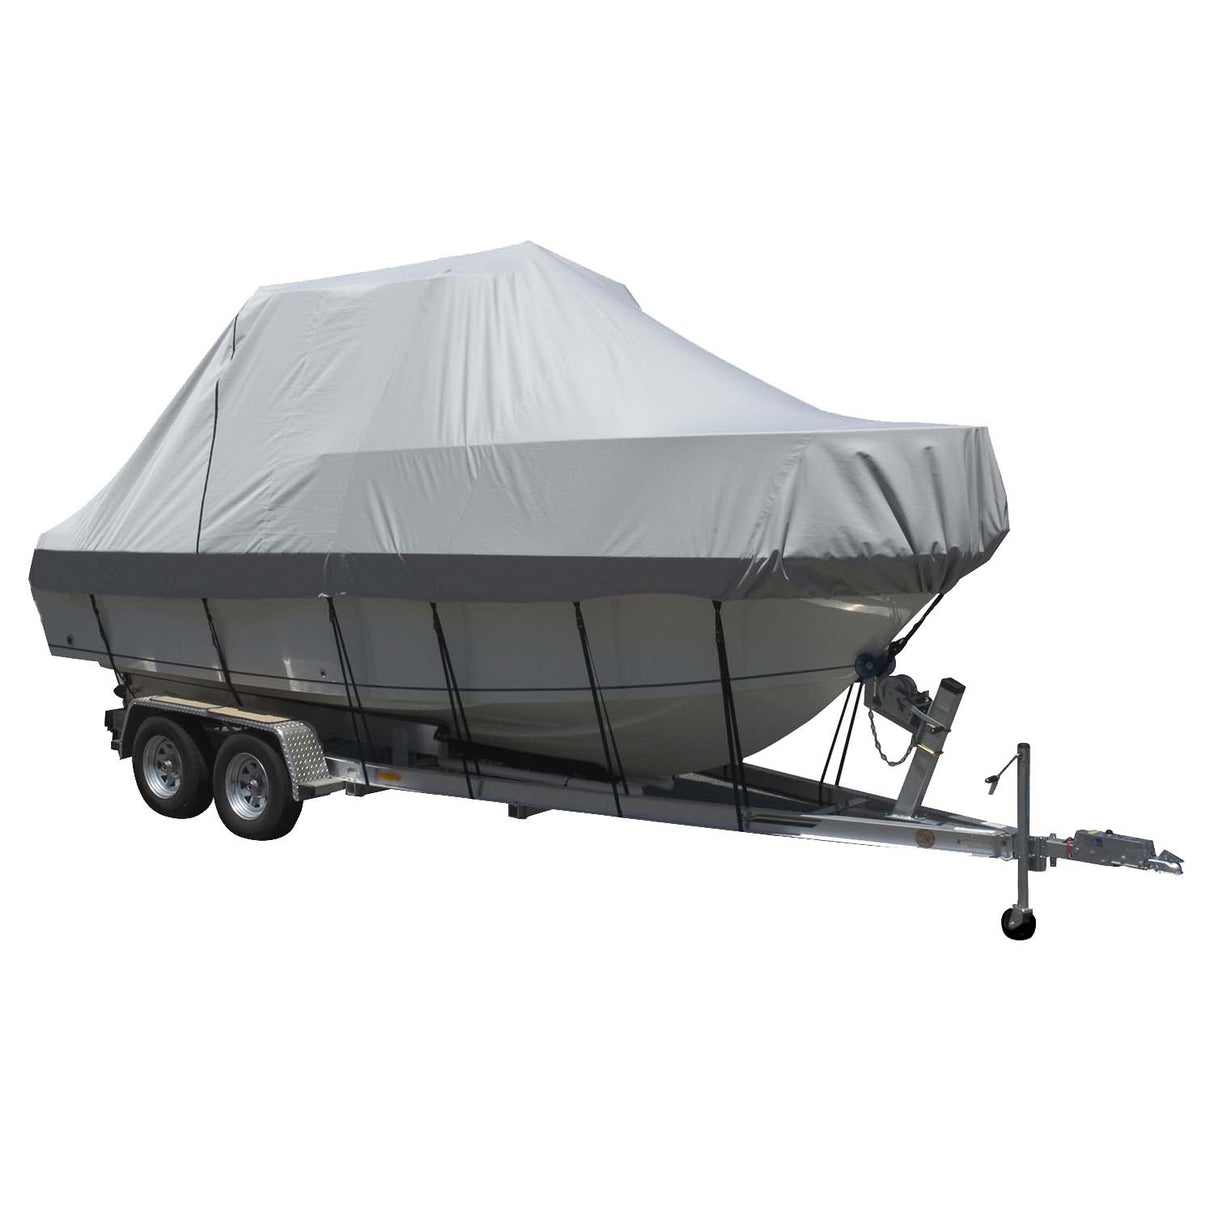 Carver Sun-DURA Specialty Boat Cover f/25.5 Walk Around Cuddy Center Console Boats - Grey - Life Raft Professionals